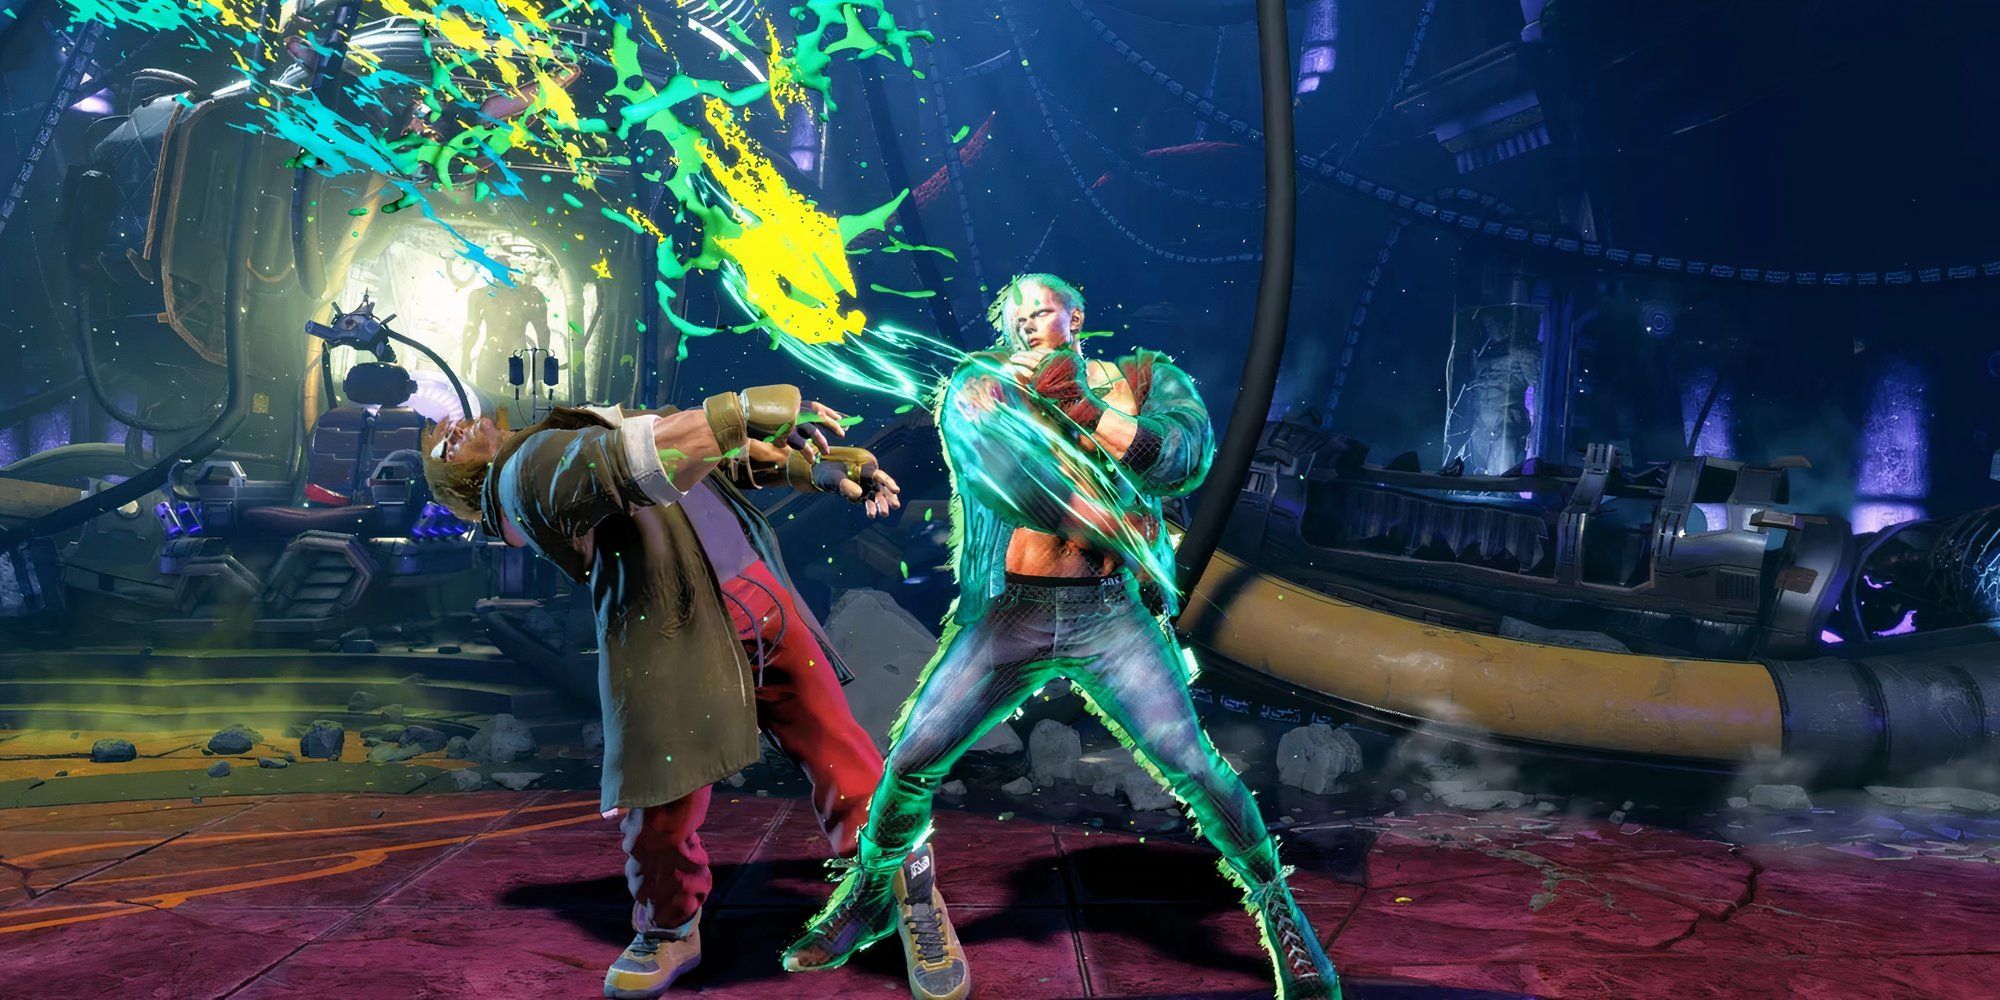 Still of Ed fighting with green and yellow psycho power in Street Fighter 6.